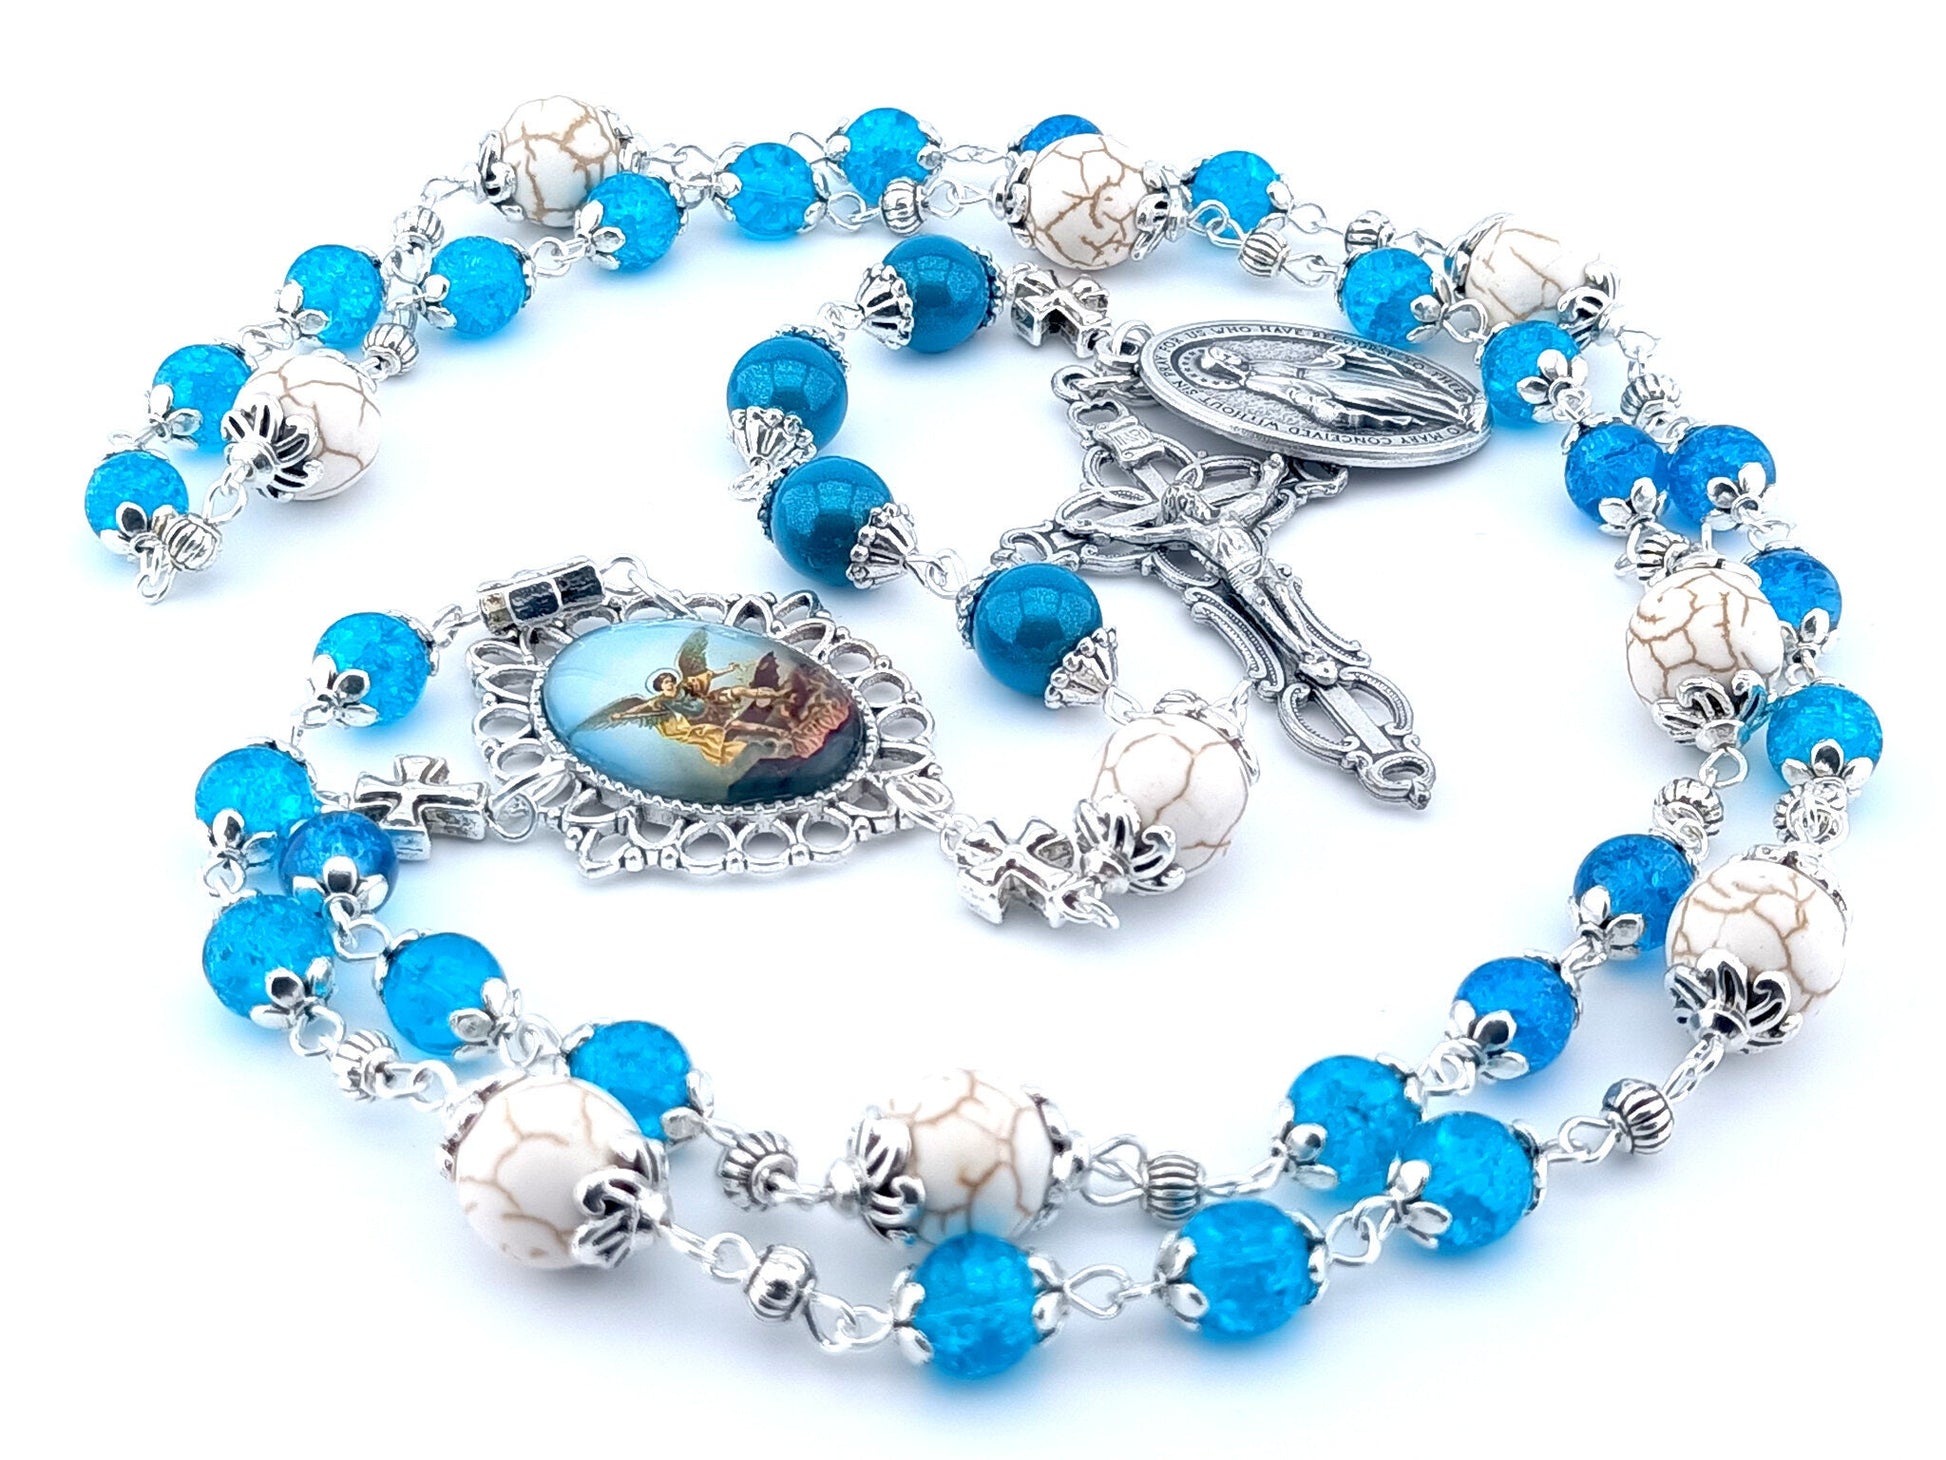 Saint Michael unique rosary beads prayer chaplet with blue glass and white gemstone beads, silver crucifix, picture centre medal and large miraculous medal.